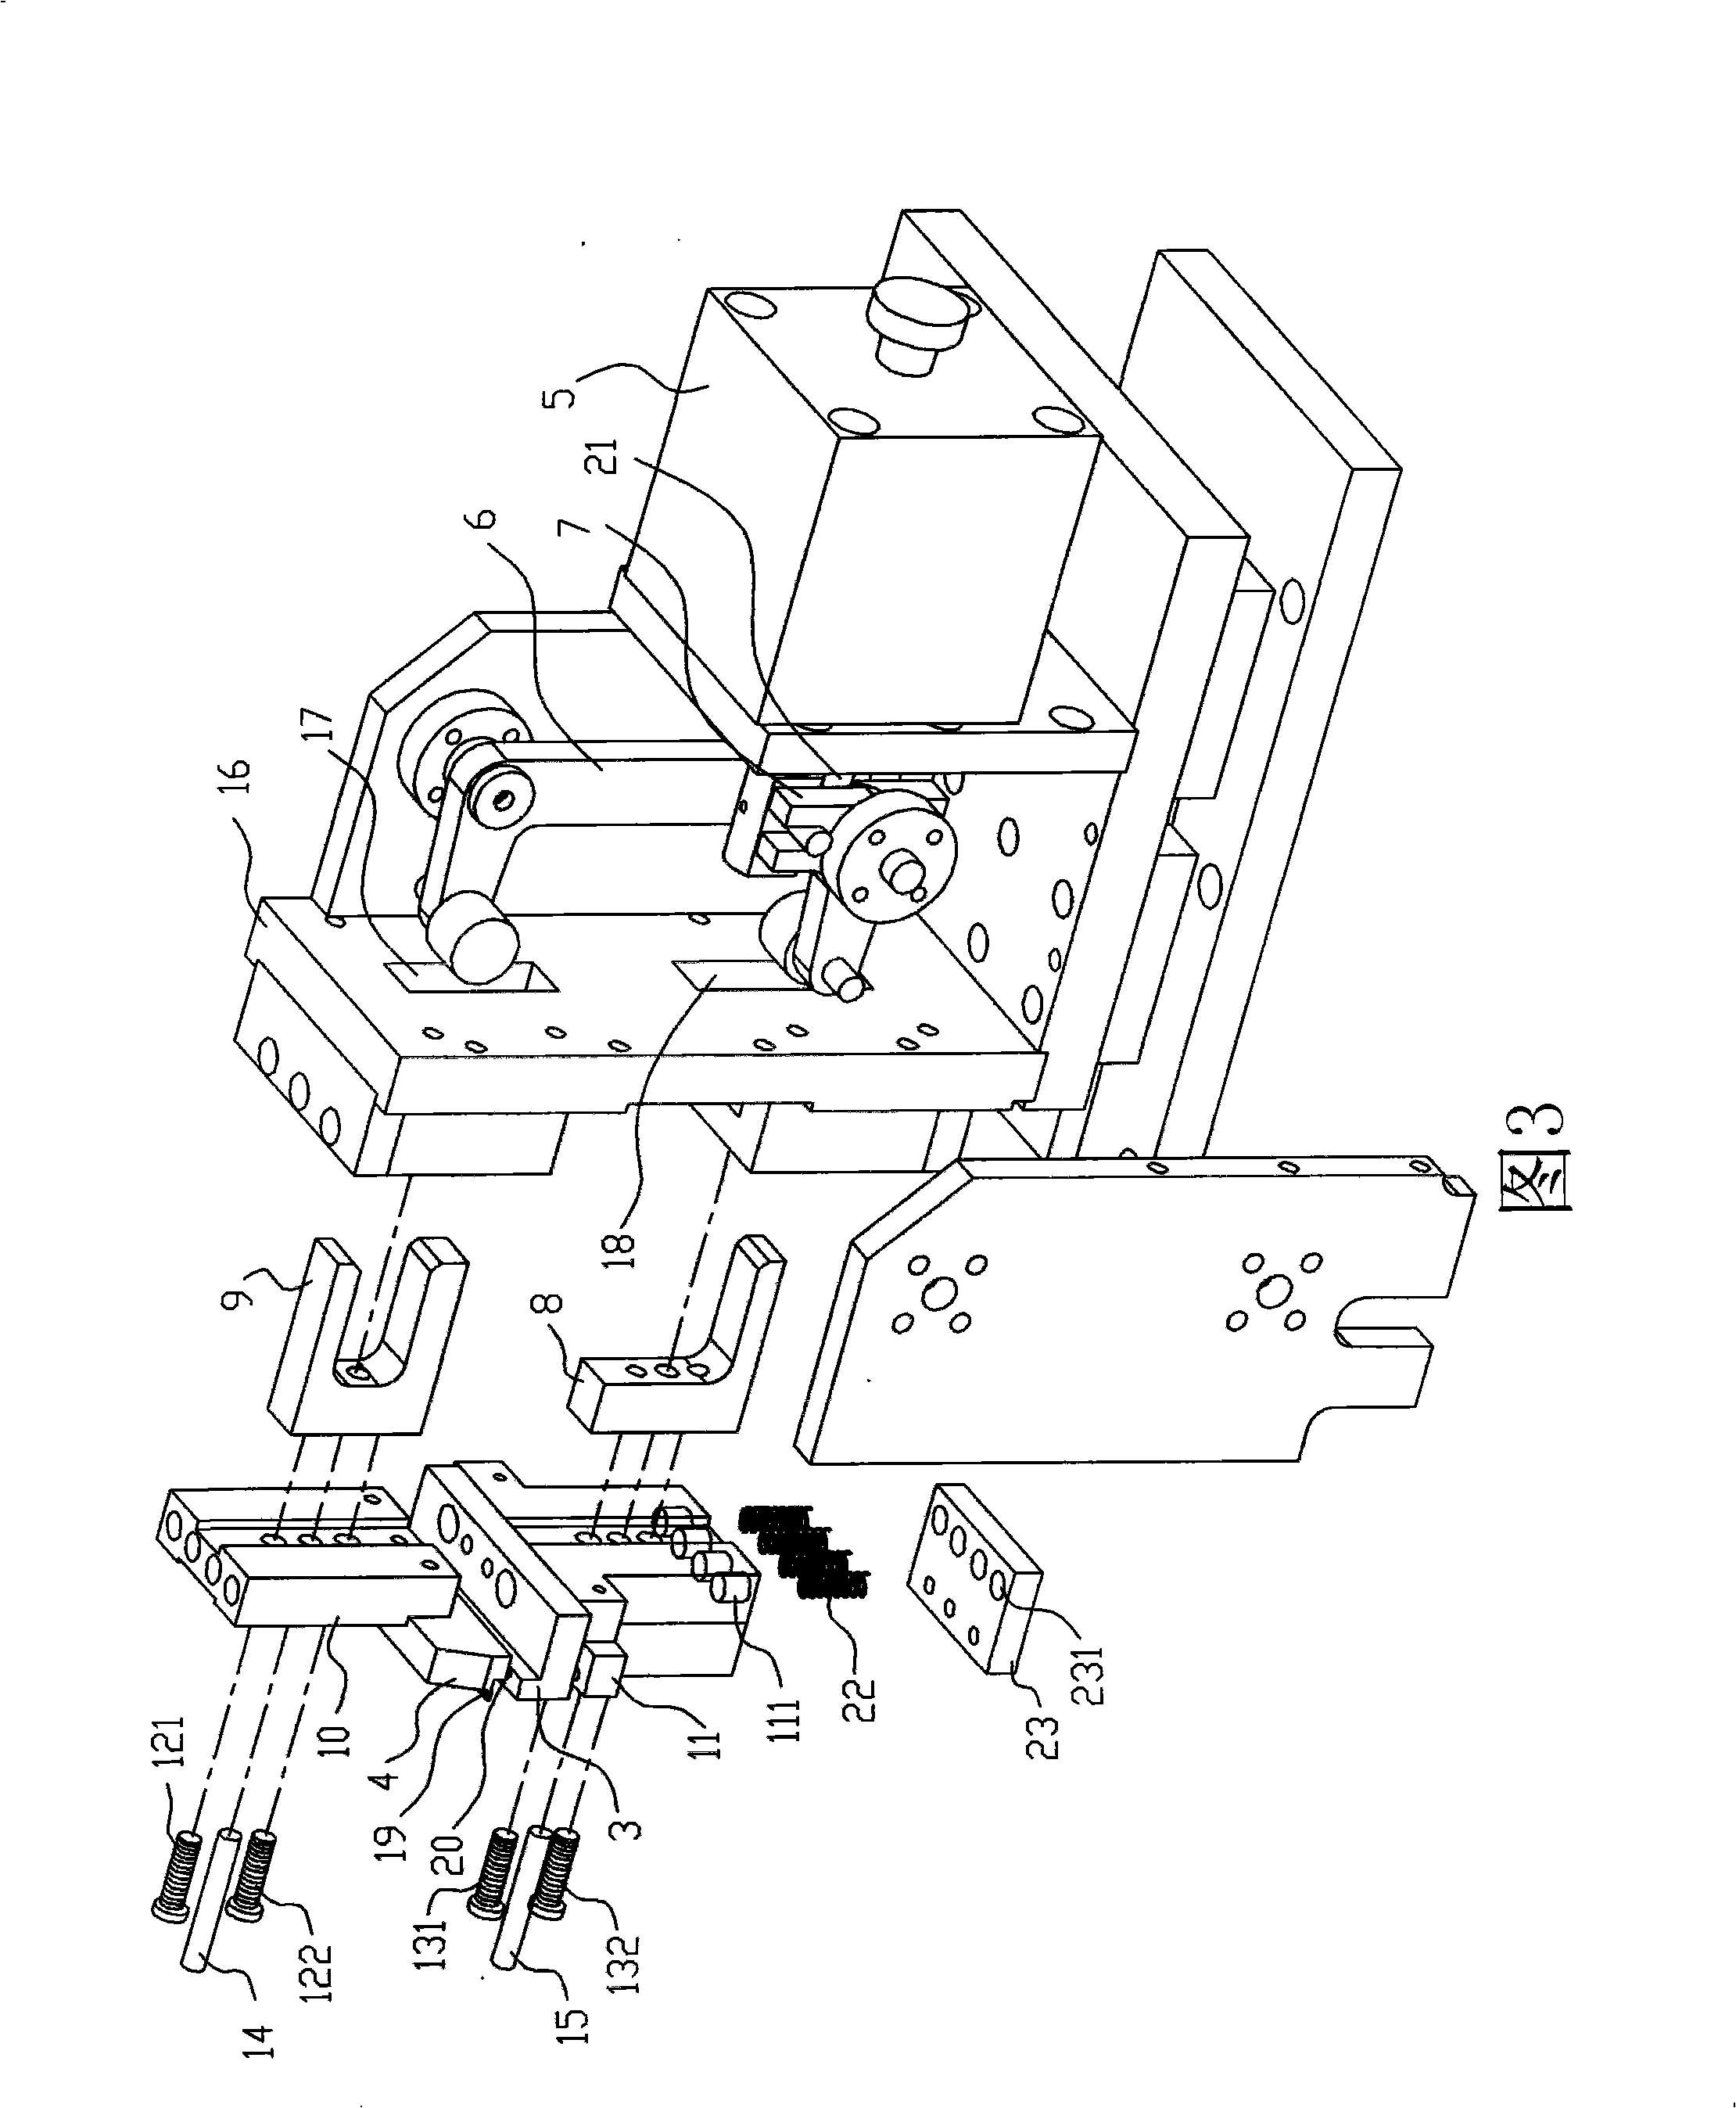 Mechanism for locating and guillotining terminal